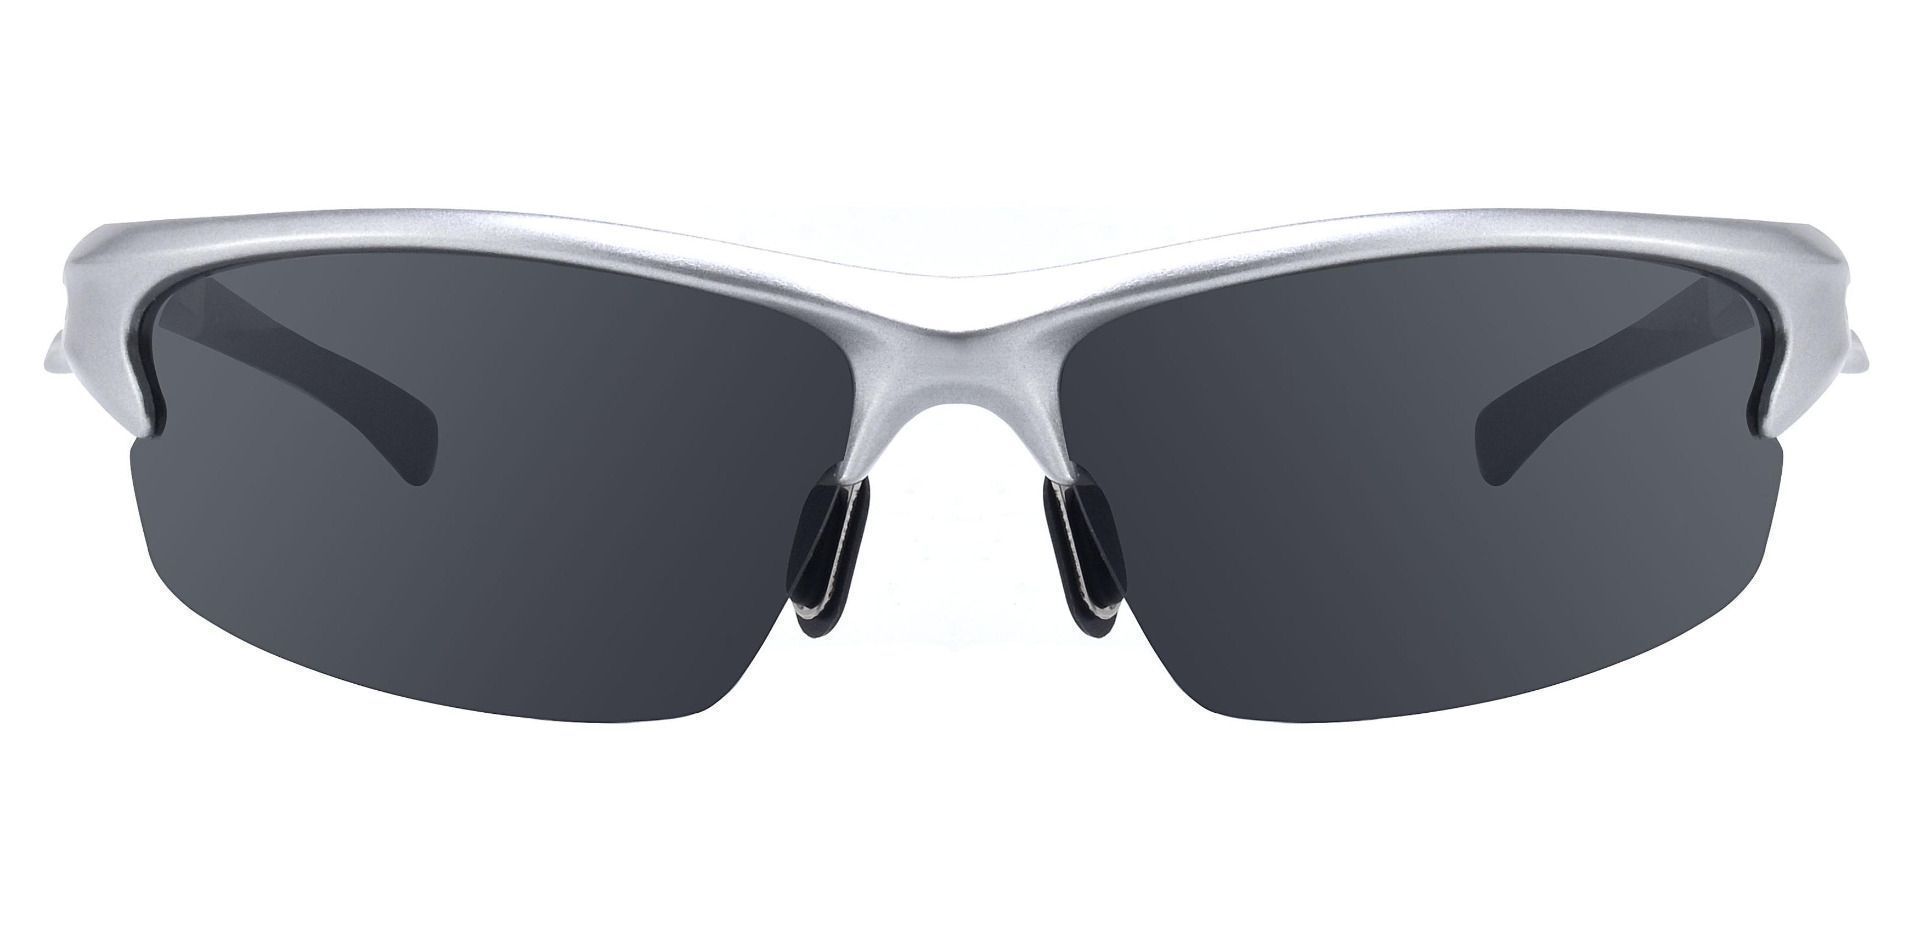 League Sports Glasses Non-Rx Sunglasses - Silver Frame With Grey Polarized Lenses